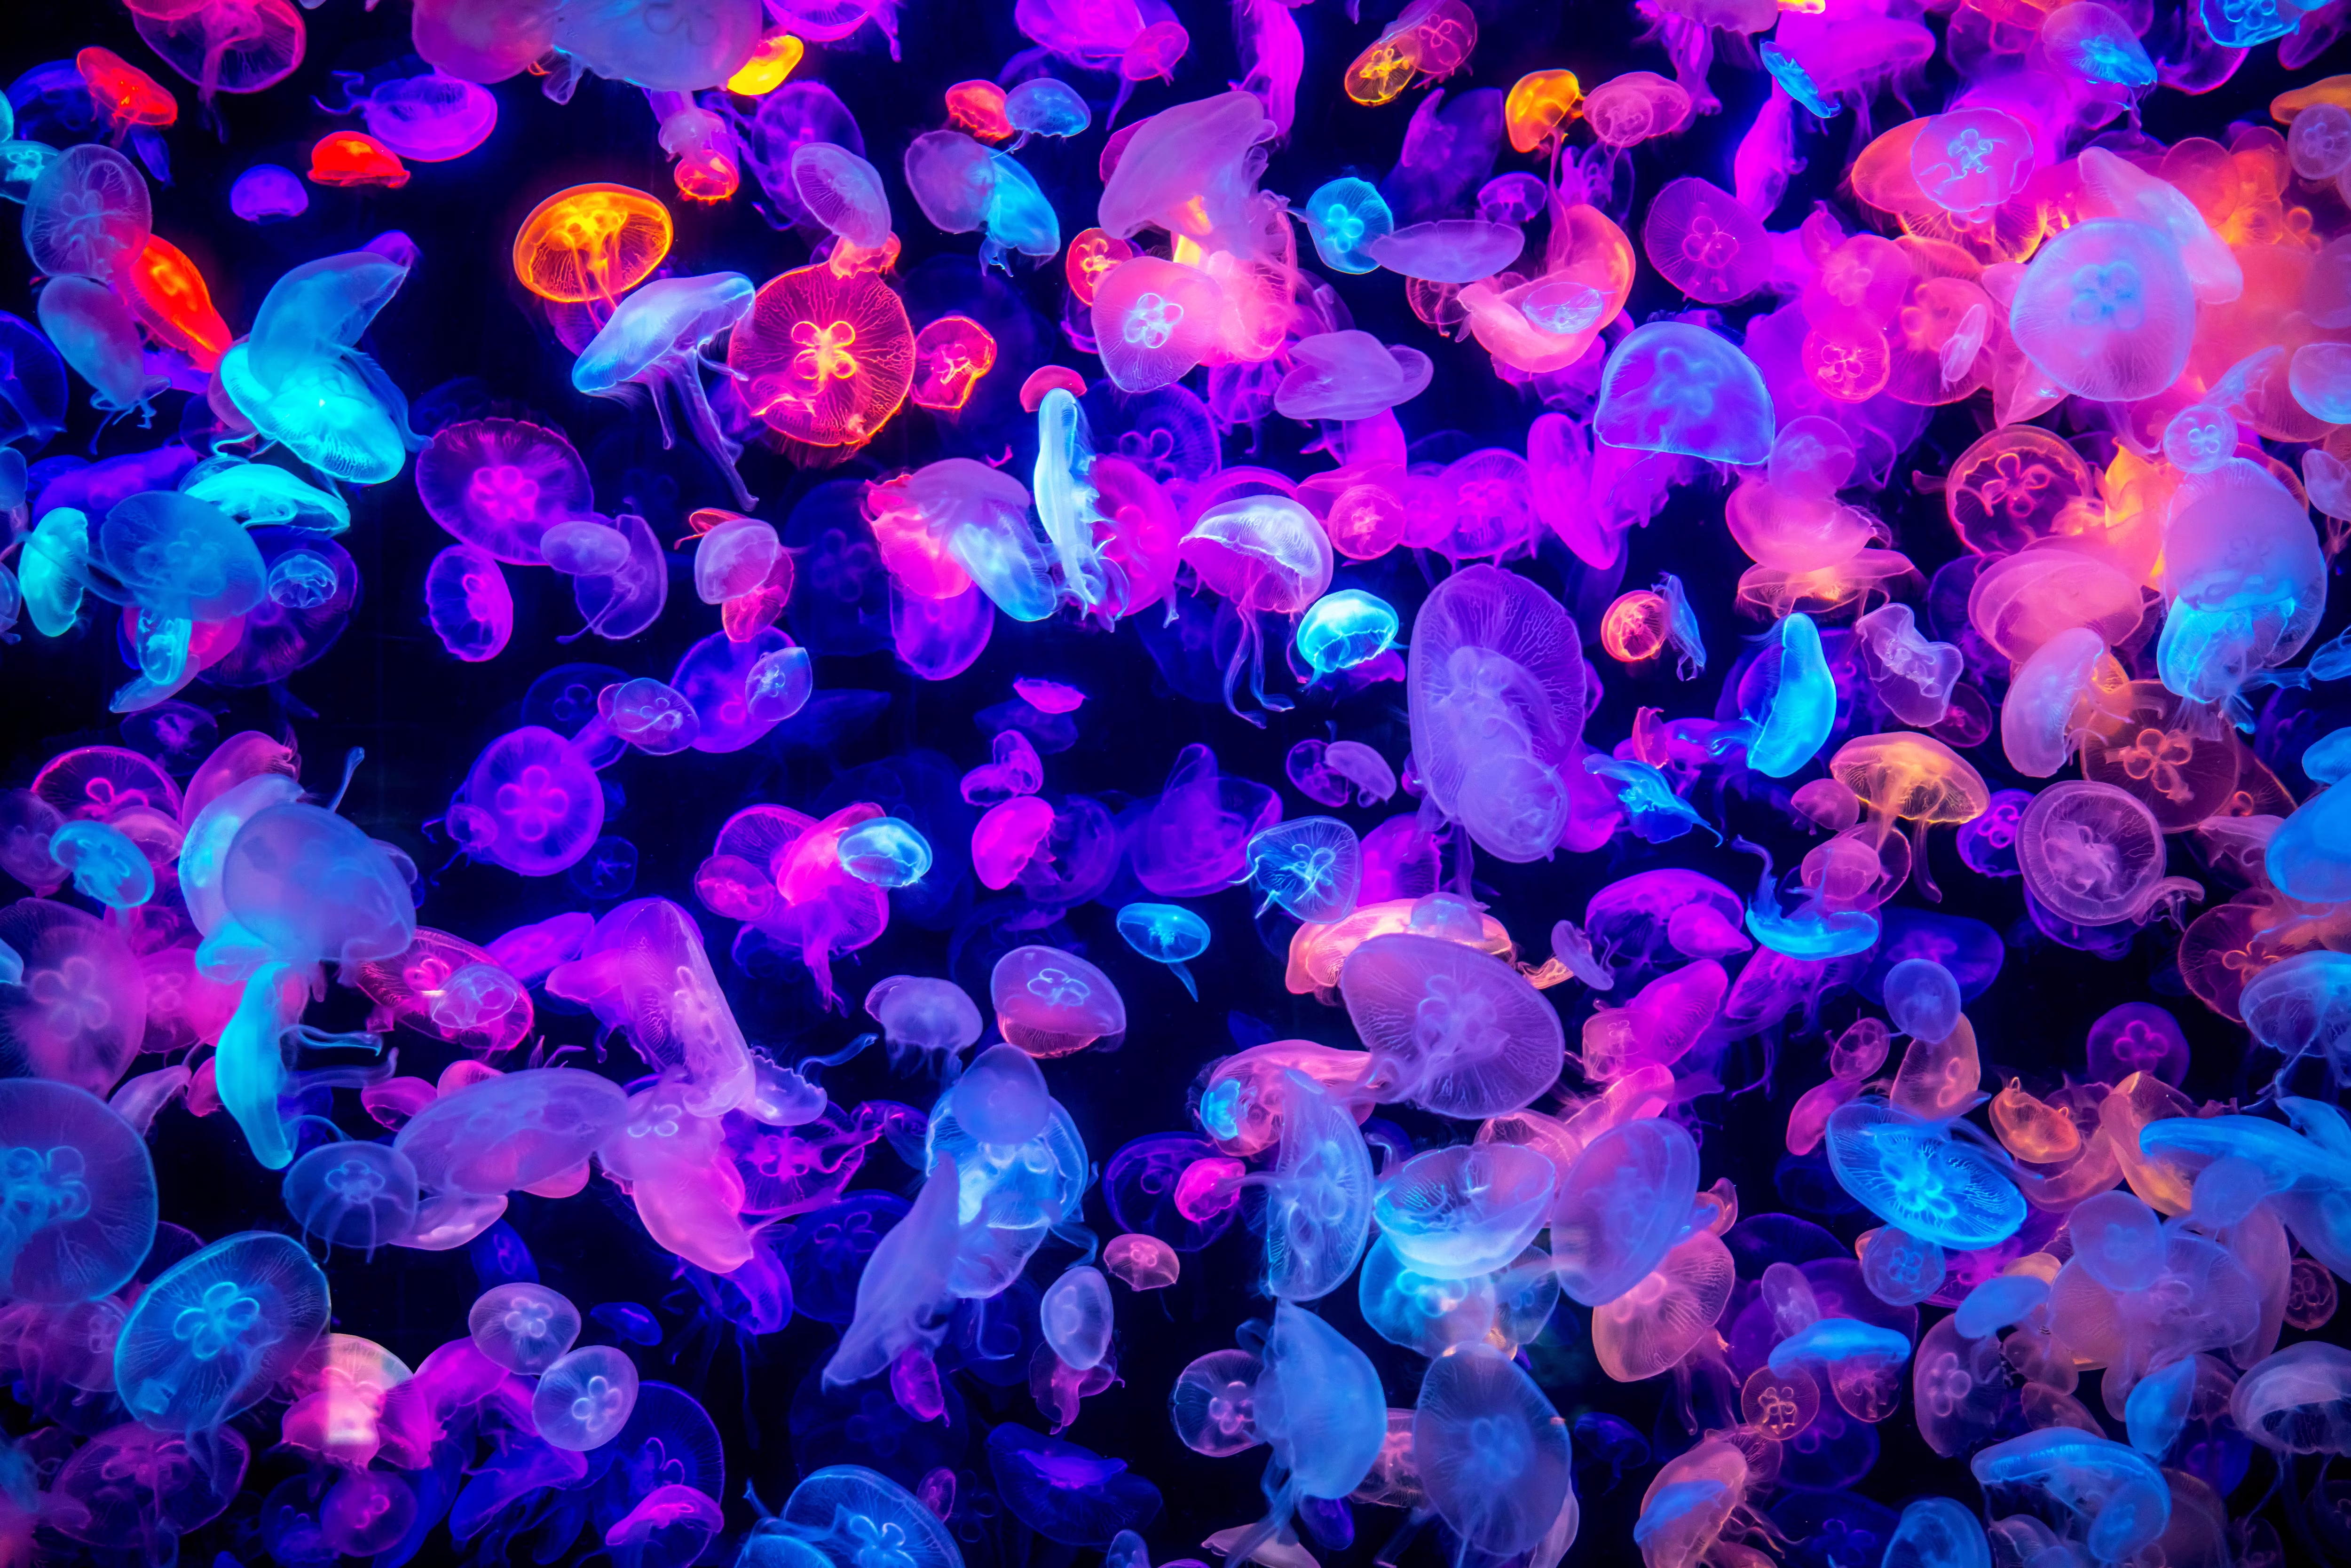 General 5000x3335 jellyfish swarm of jellyfishes colorful underwater glowing pink blue neon orange turquoise